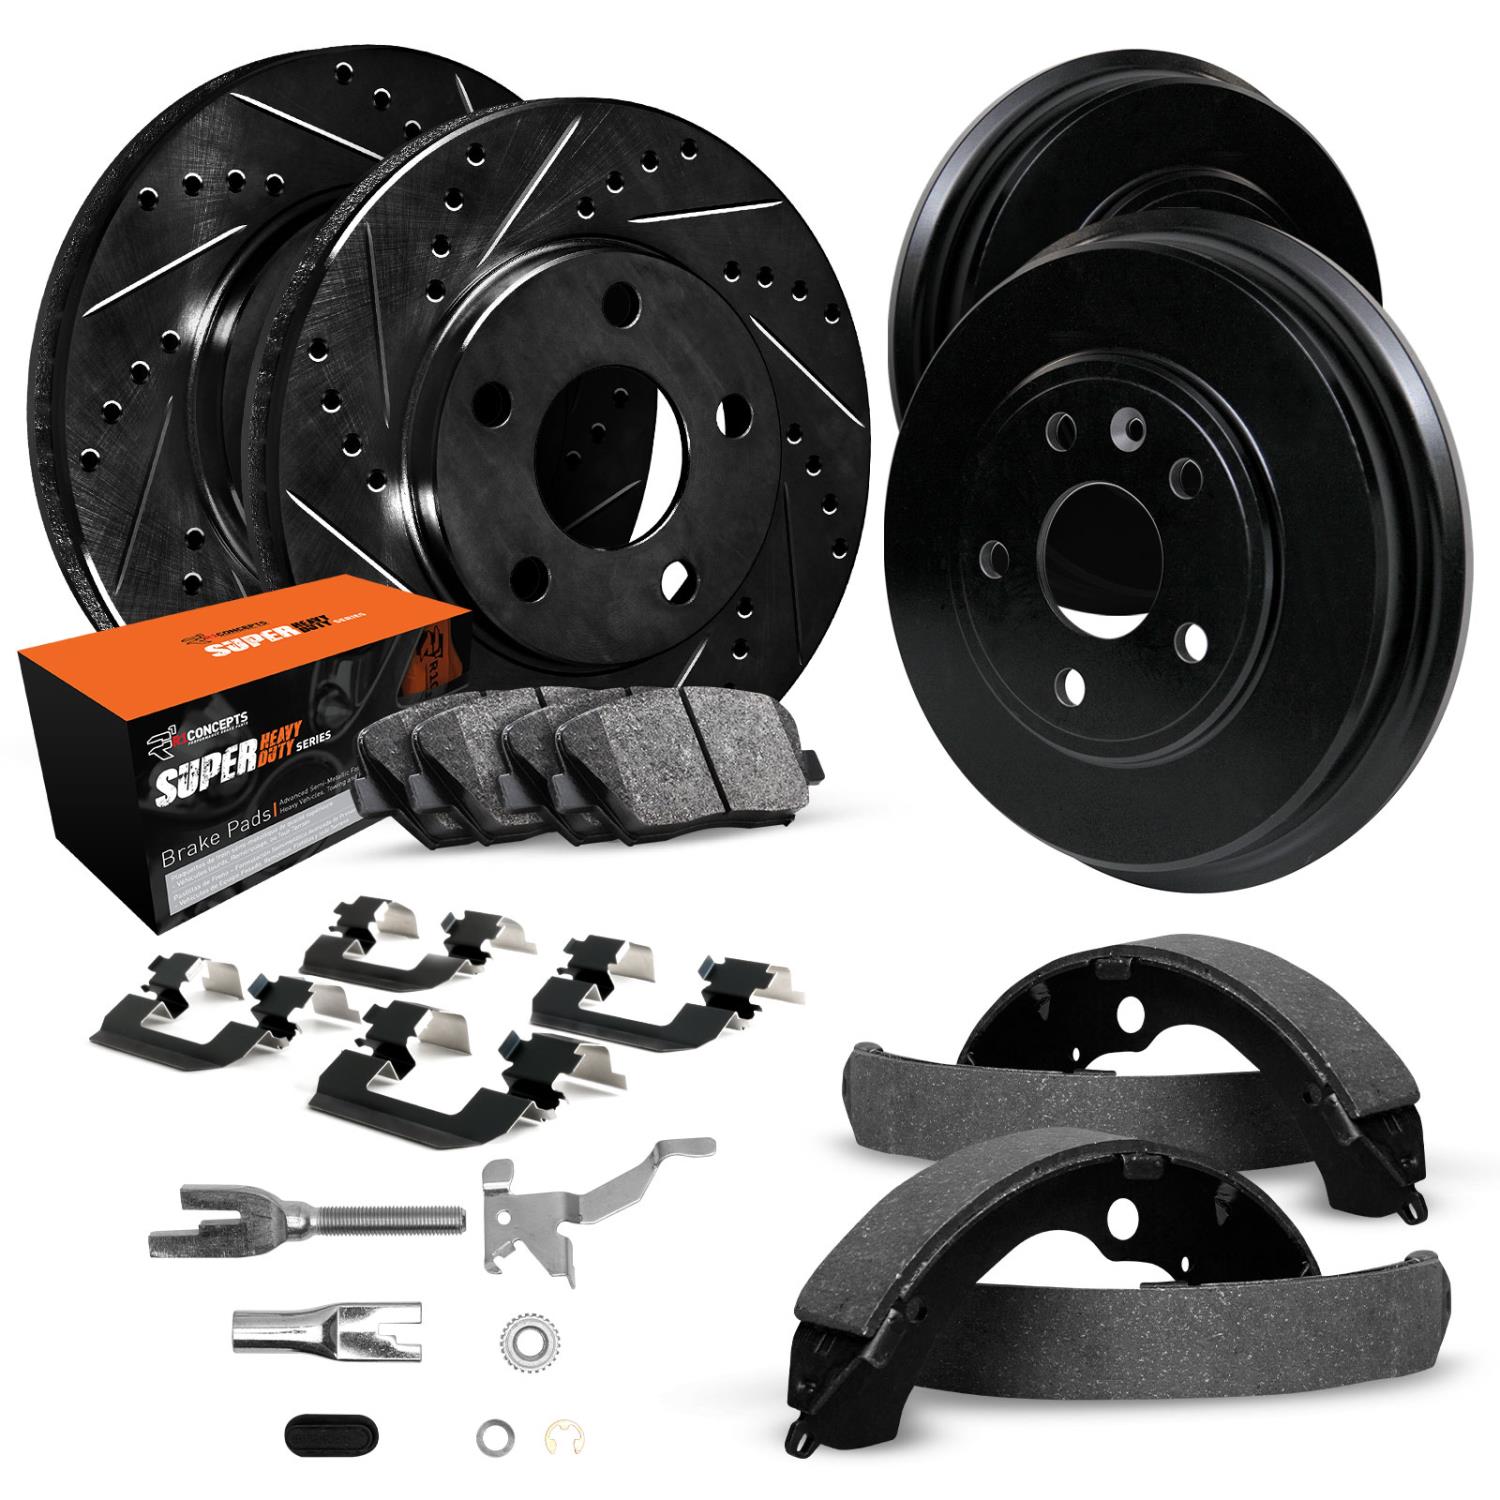 E-Line Drilled/Slotted Black Rotor & Drum Set w/Super-Duty Pads, Shoes, Hardware/Adjusters, 1986-1992 Ford/Lincoln/Mercury/Mazda